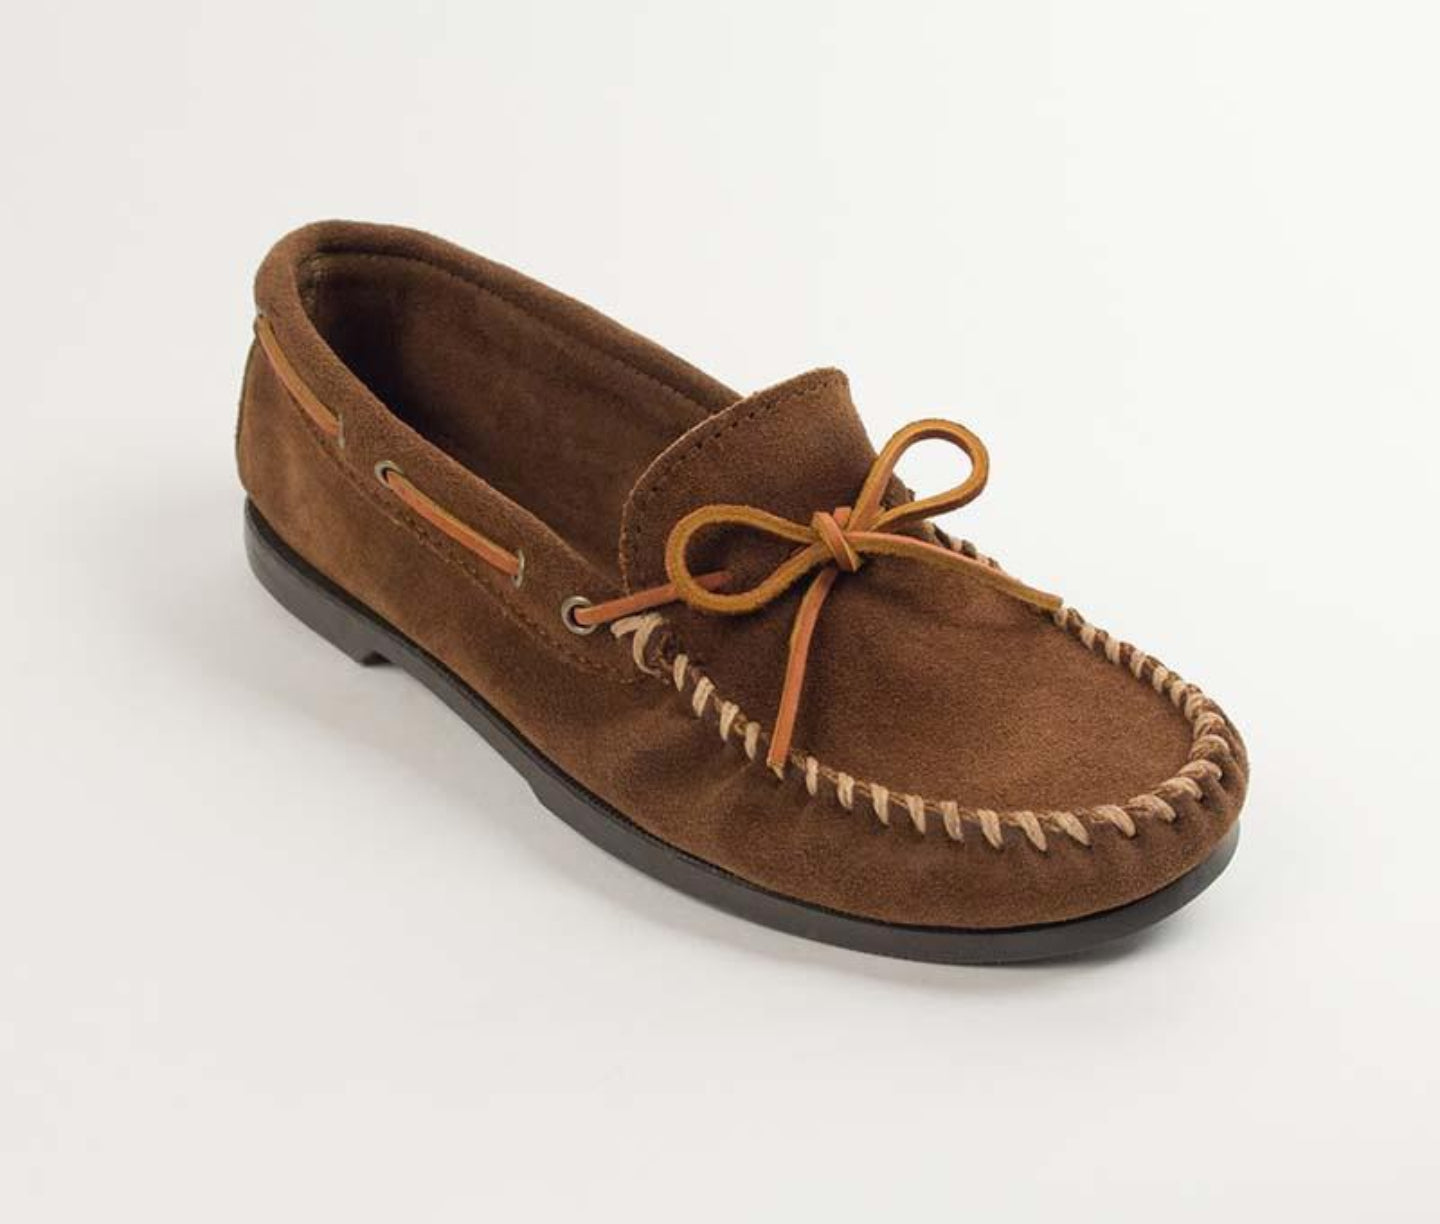 Classic Camp Moccasin in Dusty Brown from 3/4 Angle View